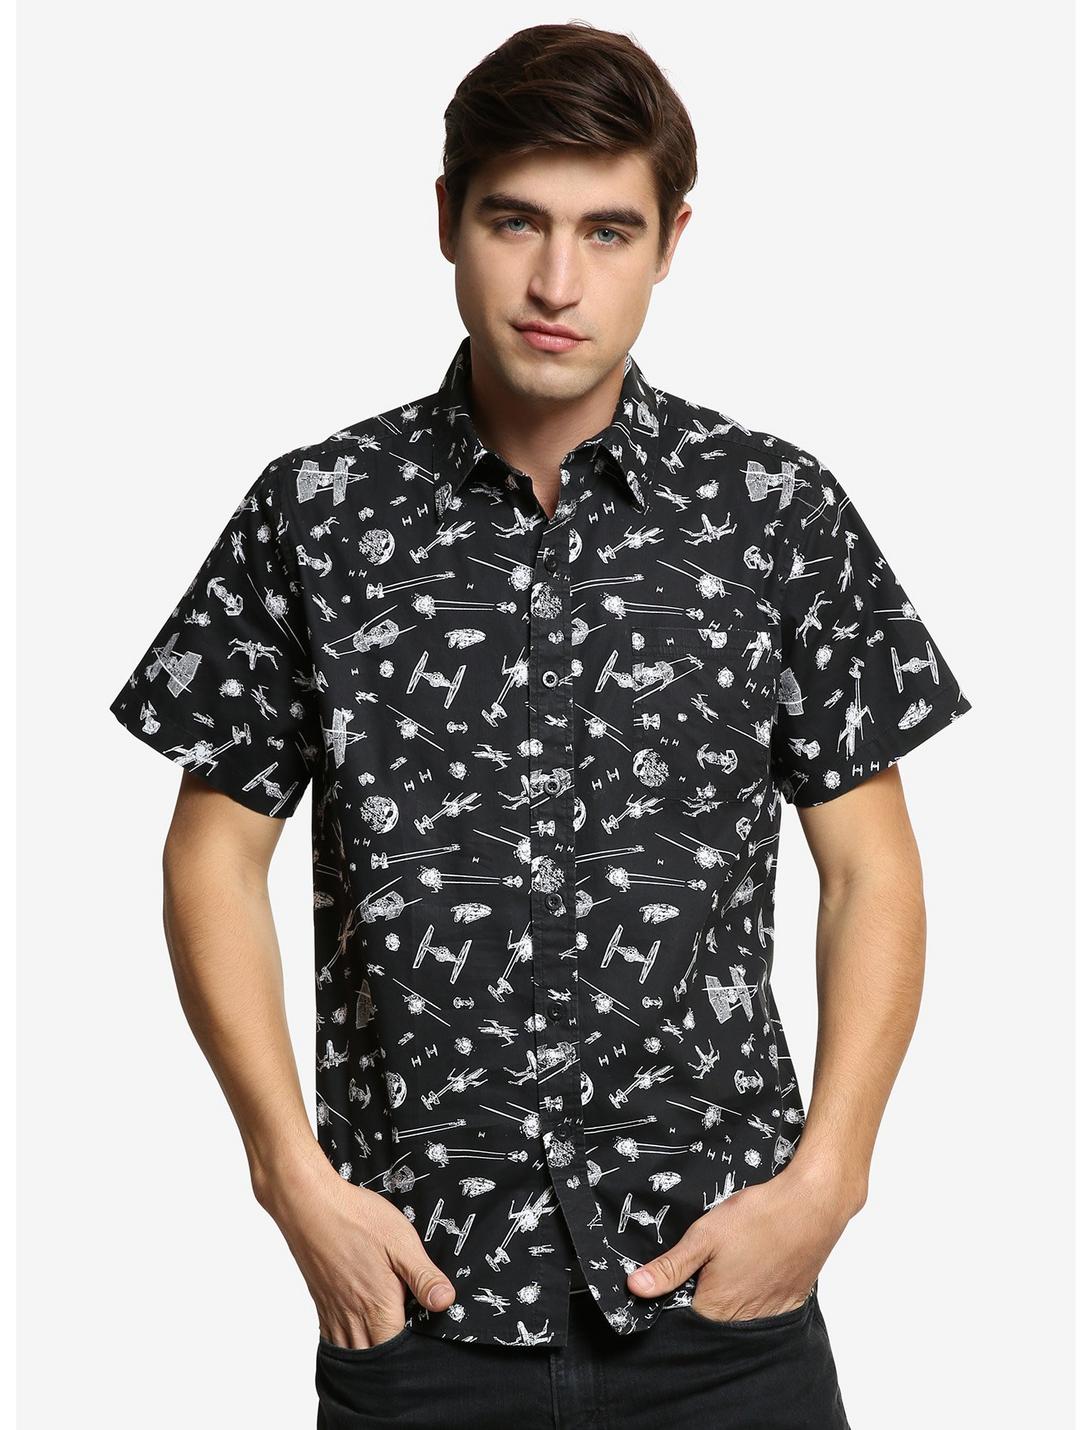 Star Wars Fighter All Over Print Button Down, MULTI, hi-res